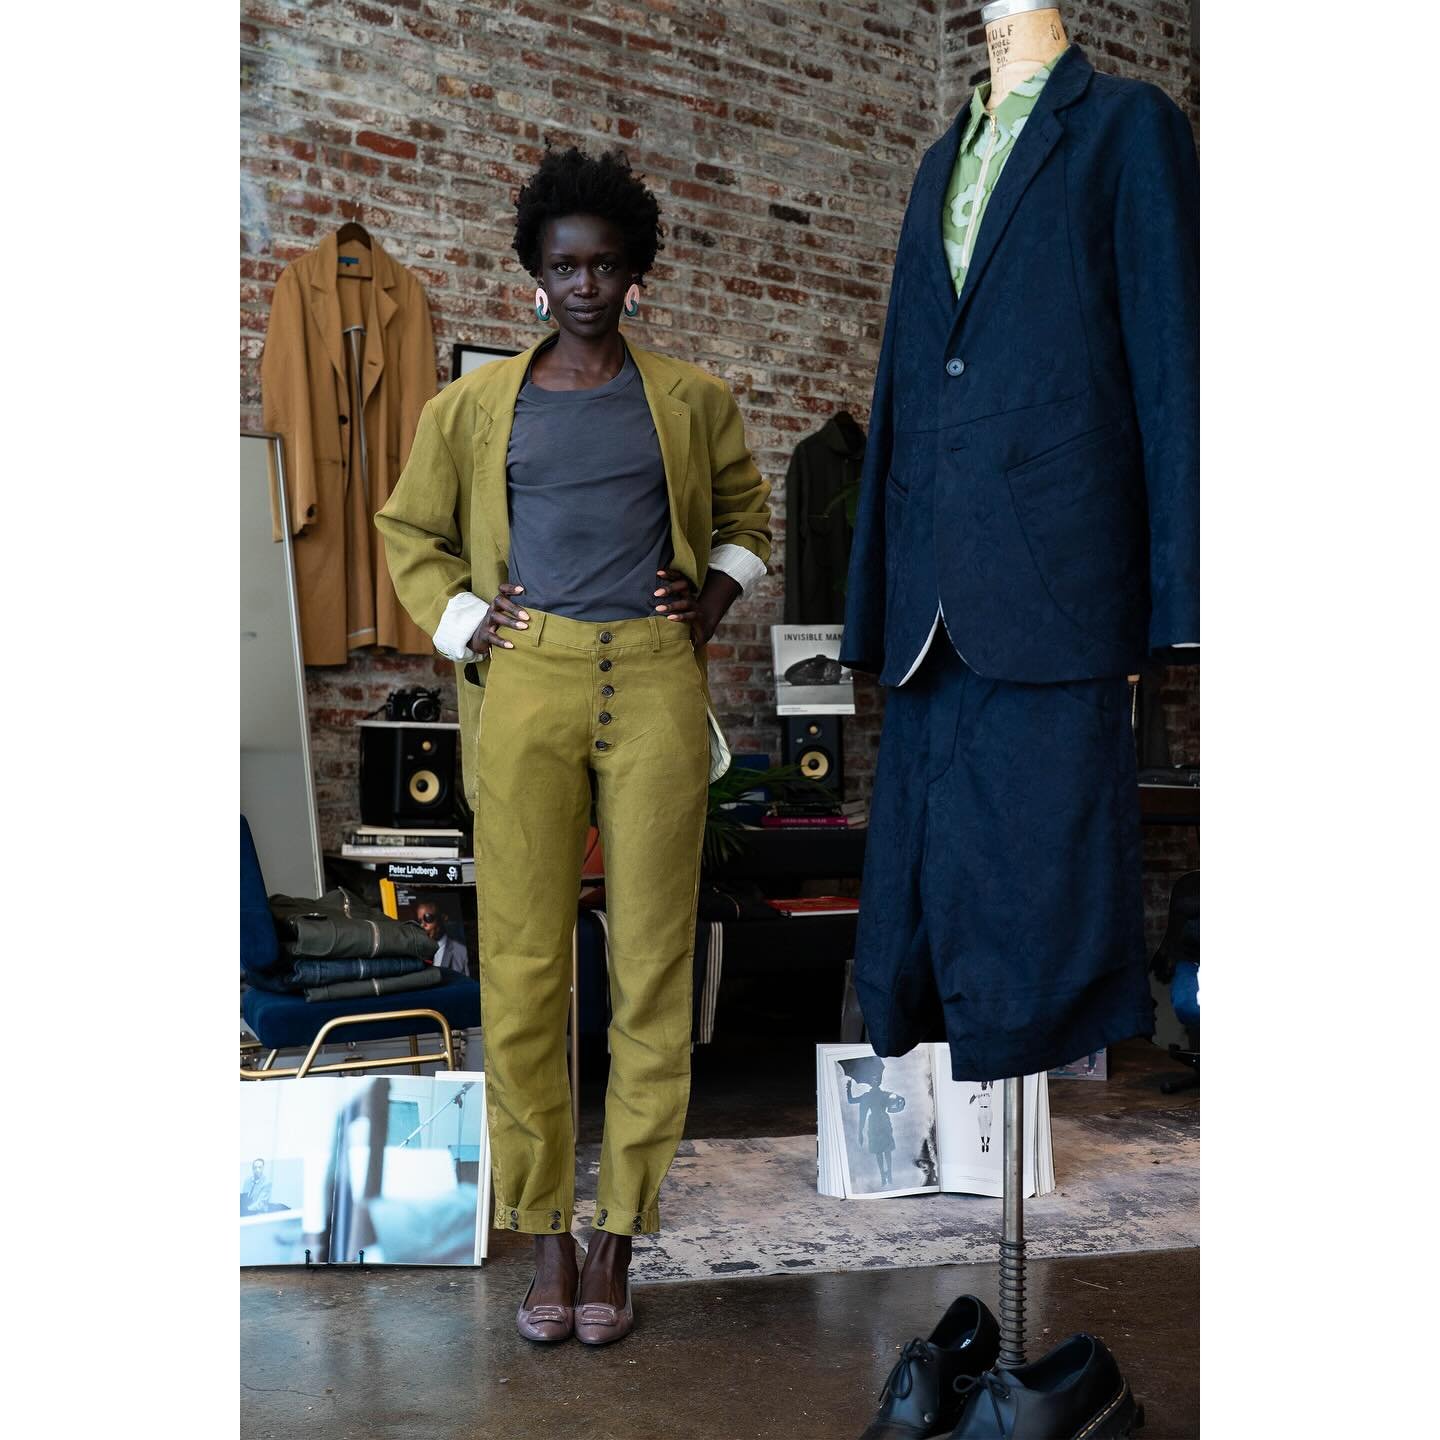 When you let impromptu moments happen! 
From Nairobi to Brooklyn. 
Akuol In our Olive Ghass linen blazer x  Savion linen pants!
Avail @ our Javelin Shop BK and online 
Made with passion on 39th st 
#linensuit